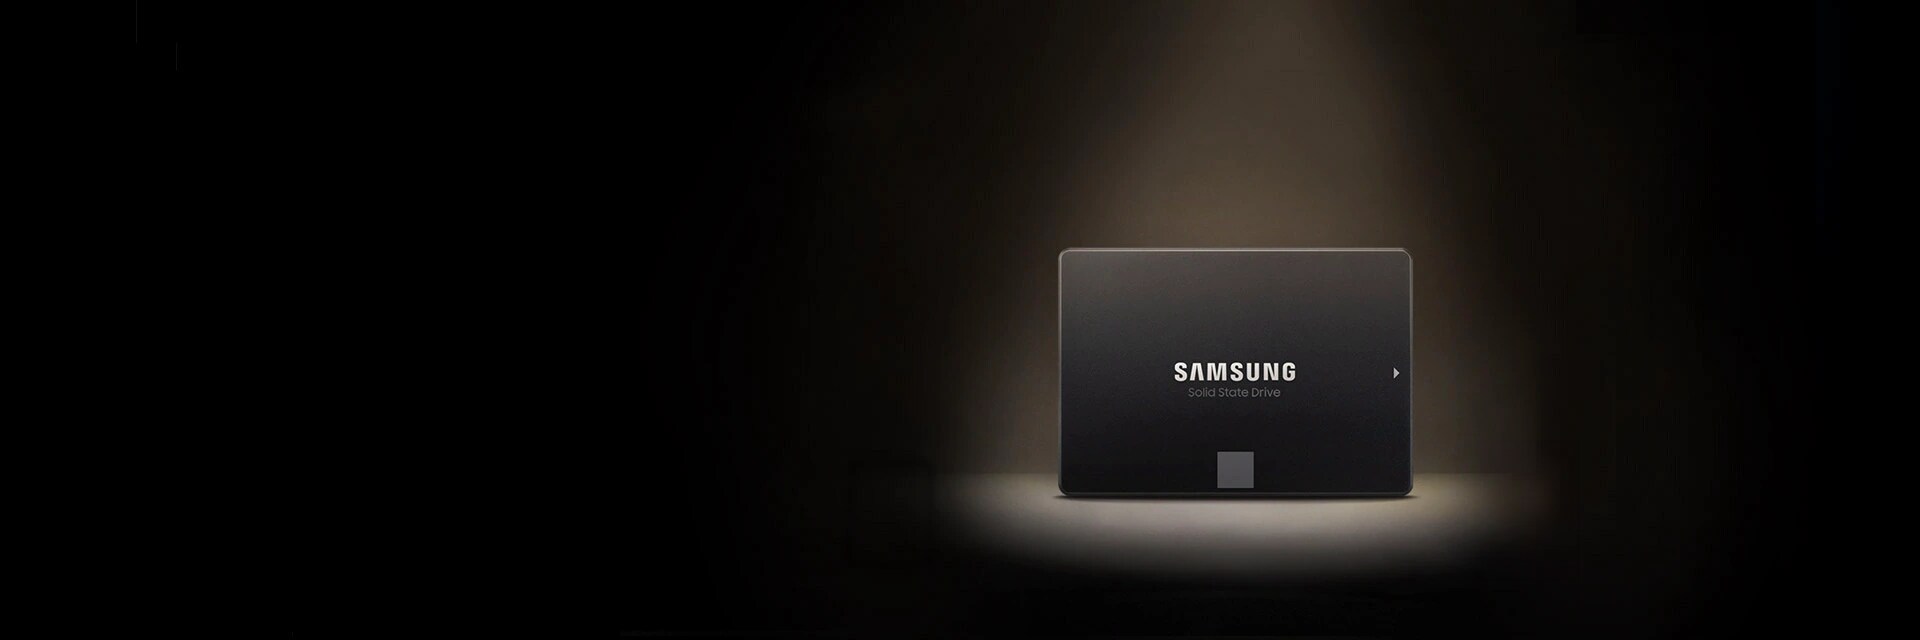 An illustrative image of Samsung 870 EVO in front and silver color and seal of World's No. 1 Flash Memory.